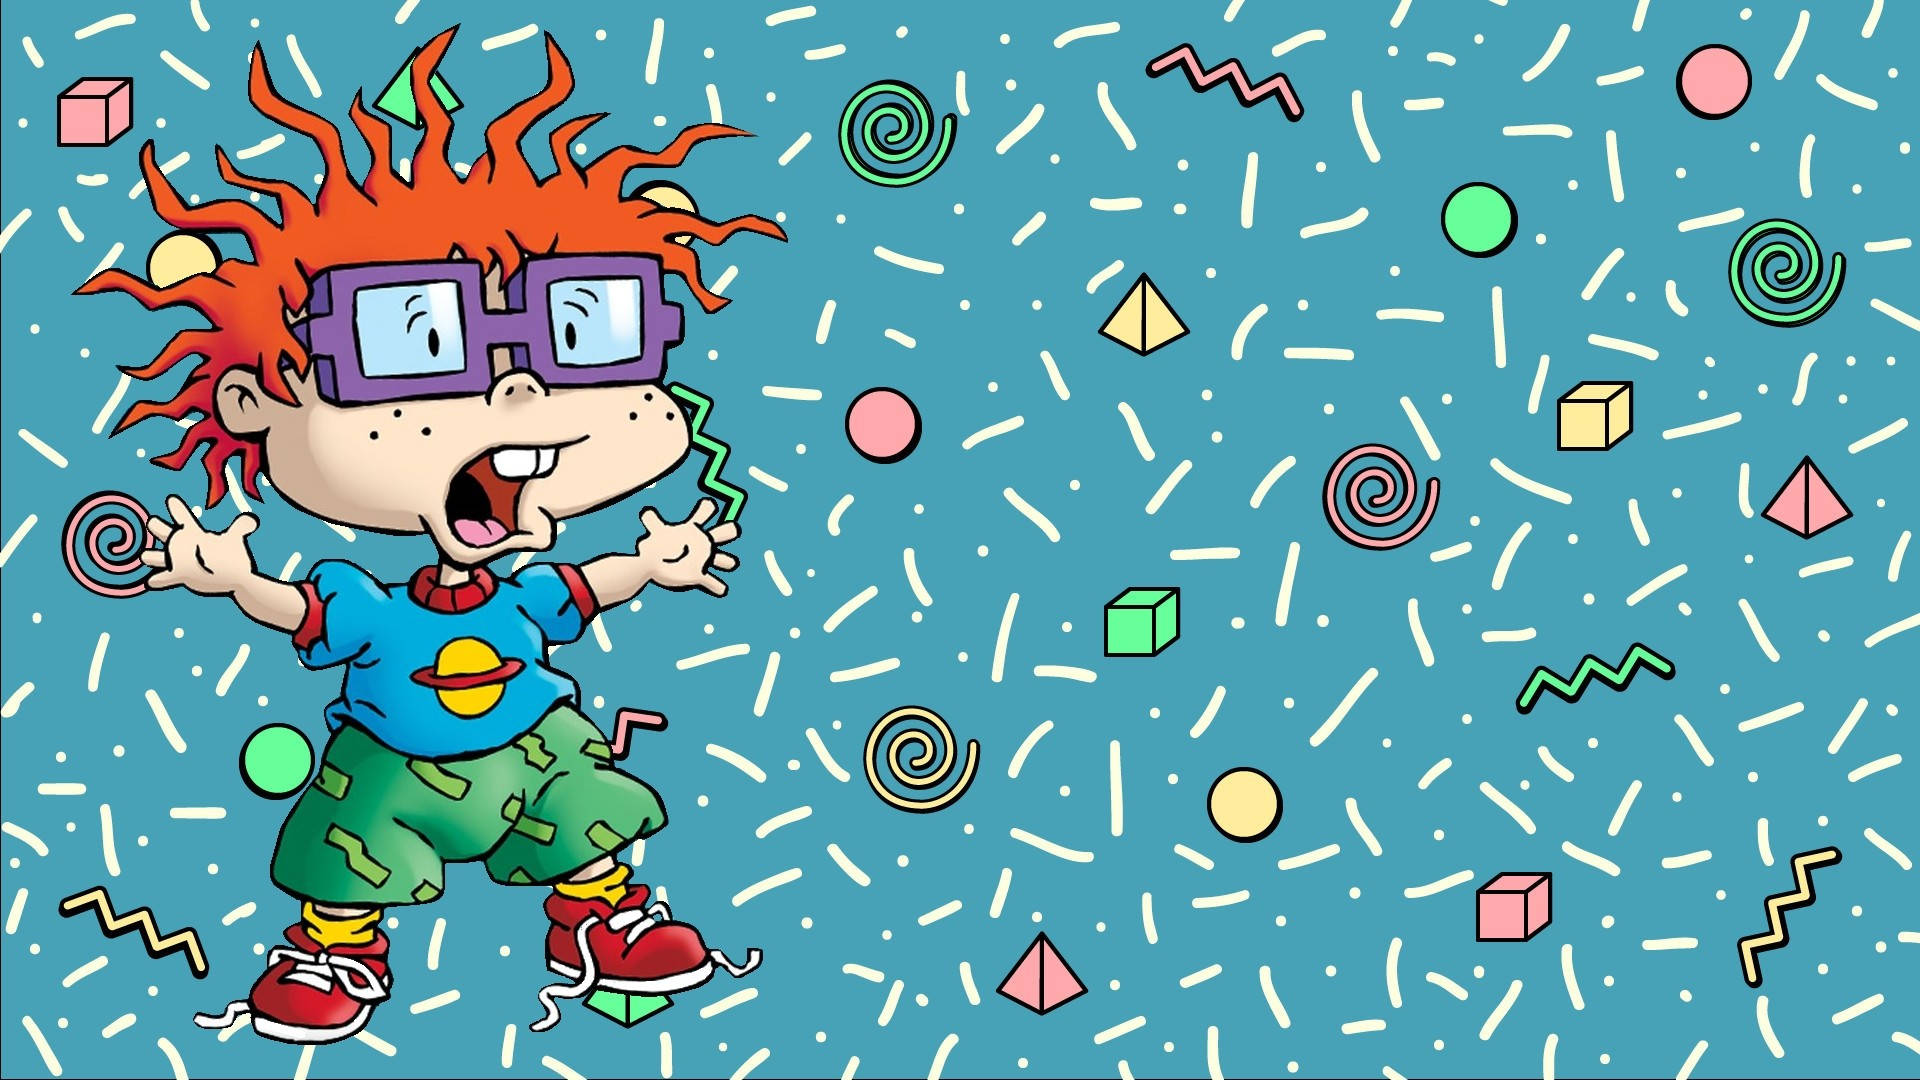 A Cartoon Character With Red Hair And Glasses Background